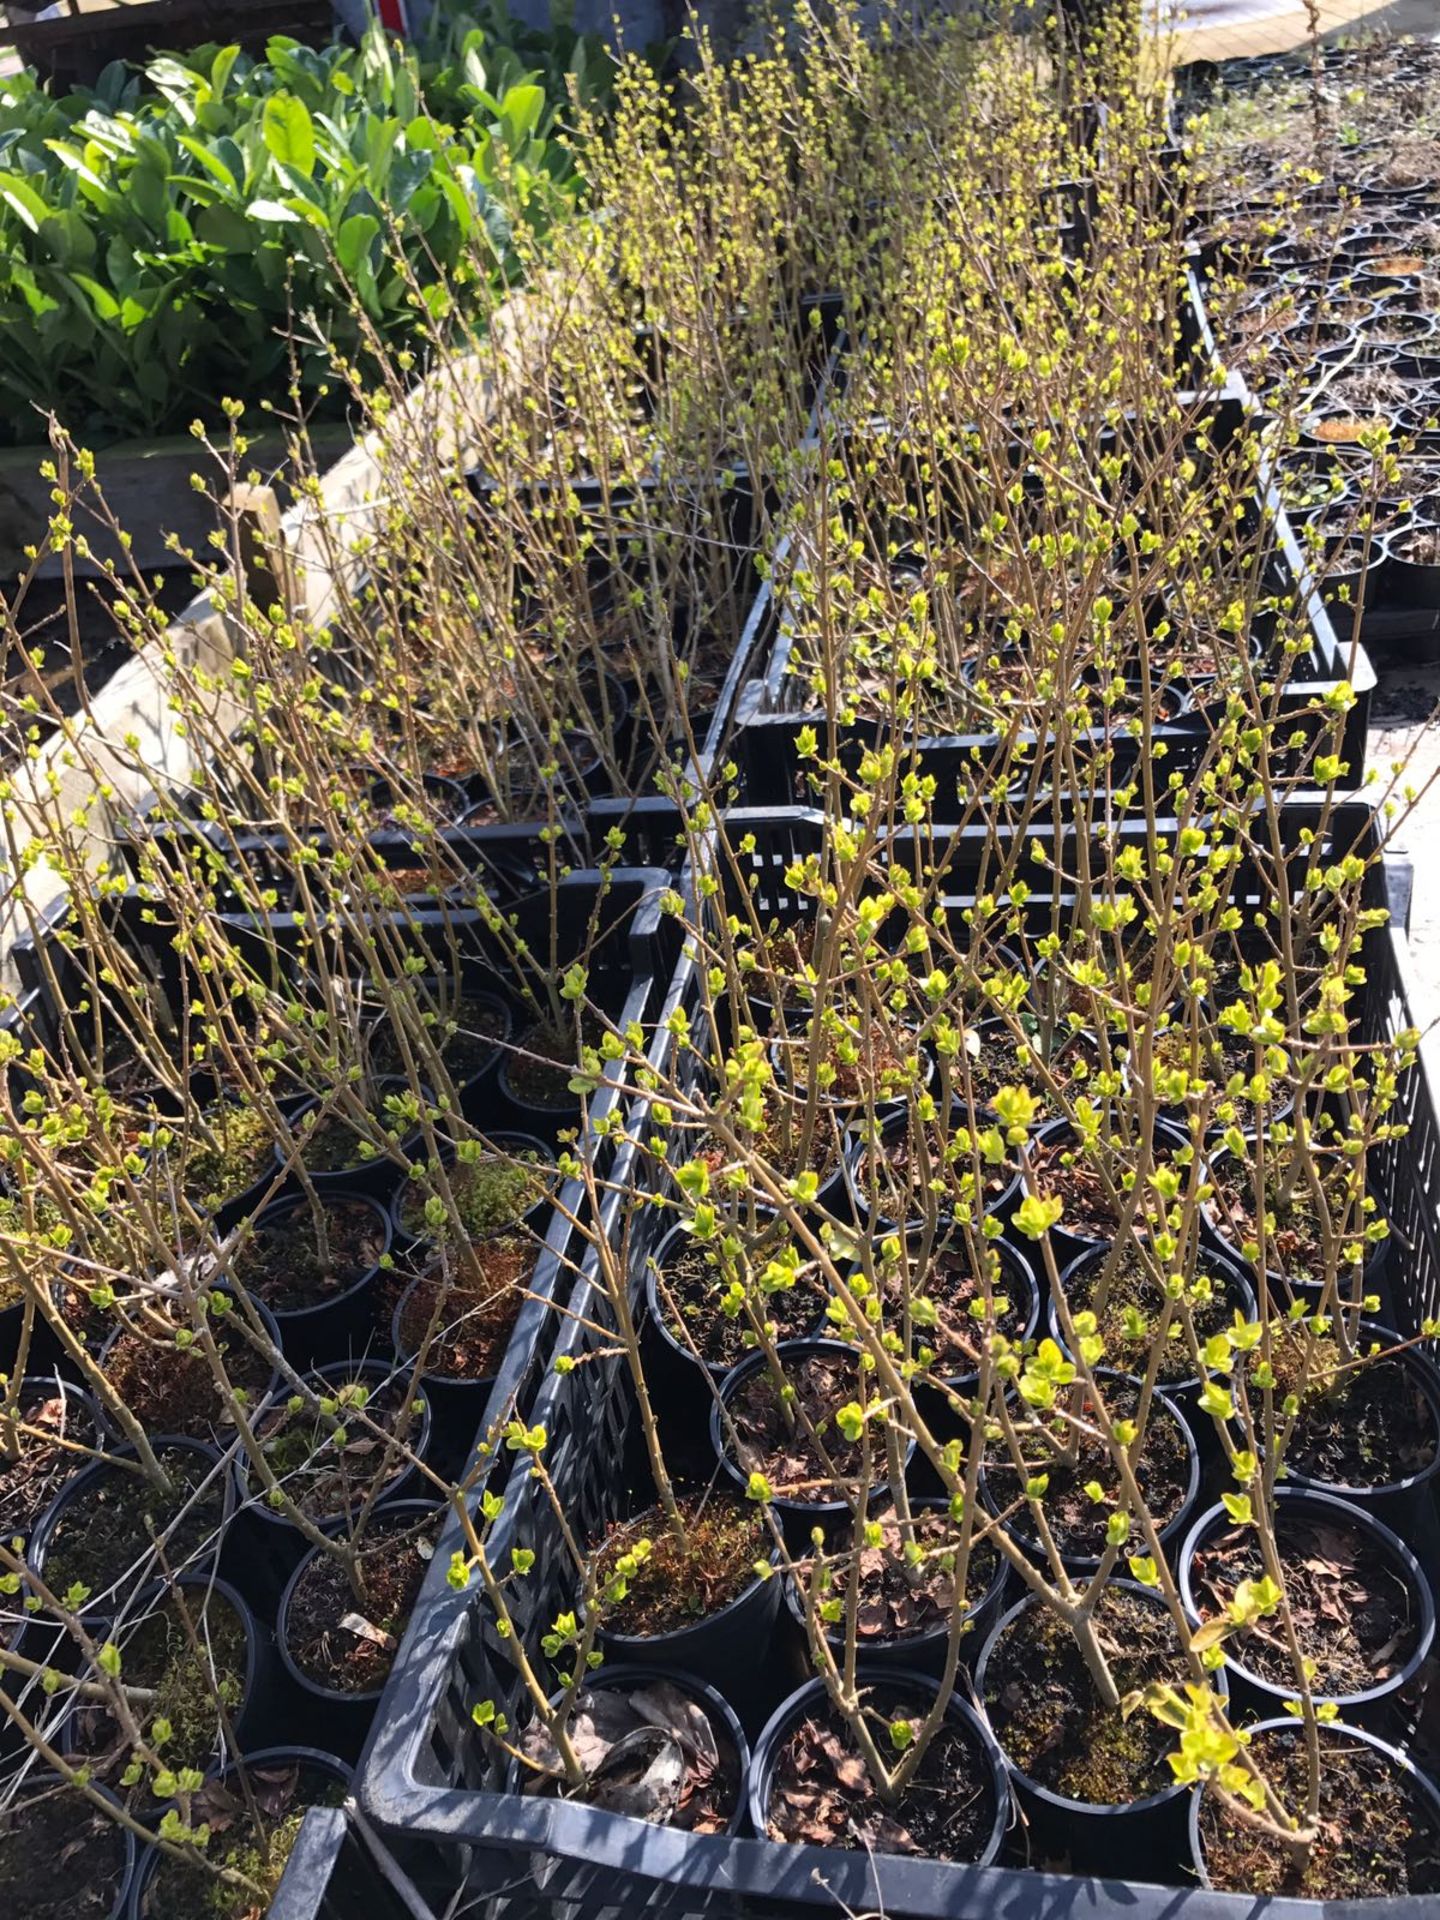 X50 LARGE PRIVET HEDGING PLANTS 500MM PLUS! 9CM POTS   lots more available directly from the Nursery